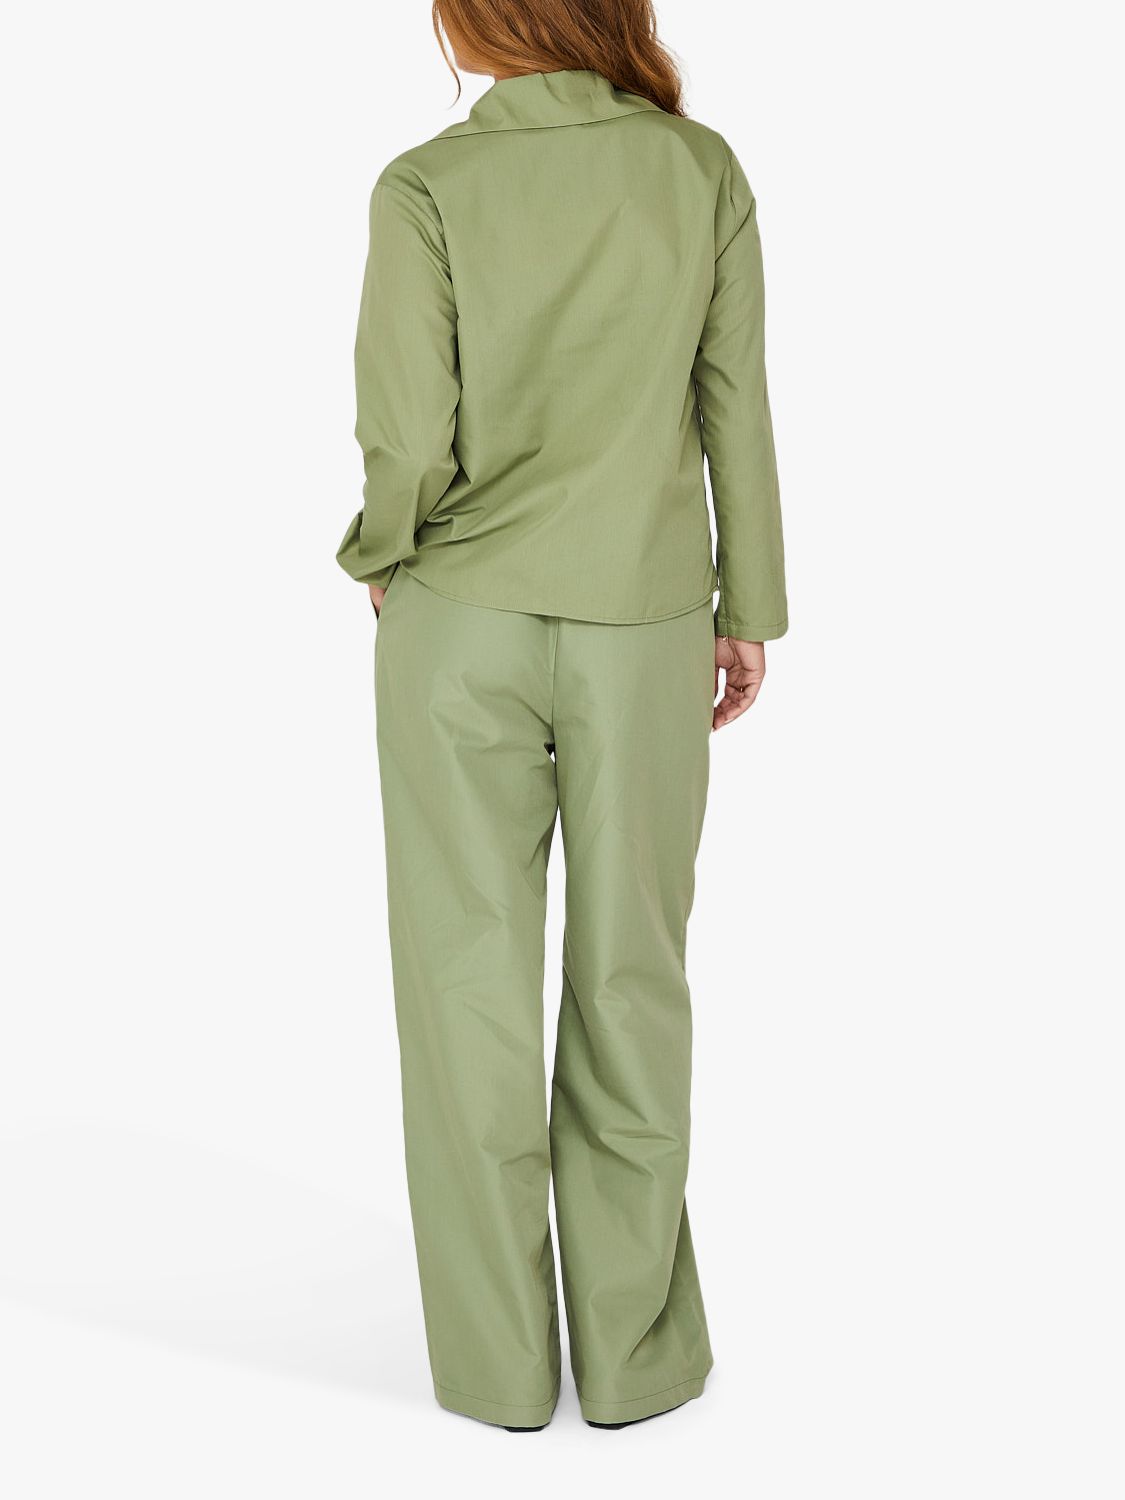 Buy A-VIEW Marley Blouse Online at johnlewis.com